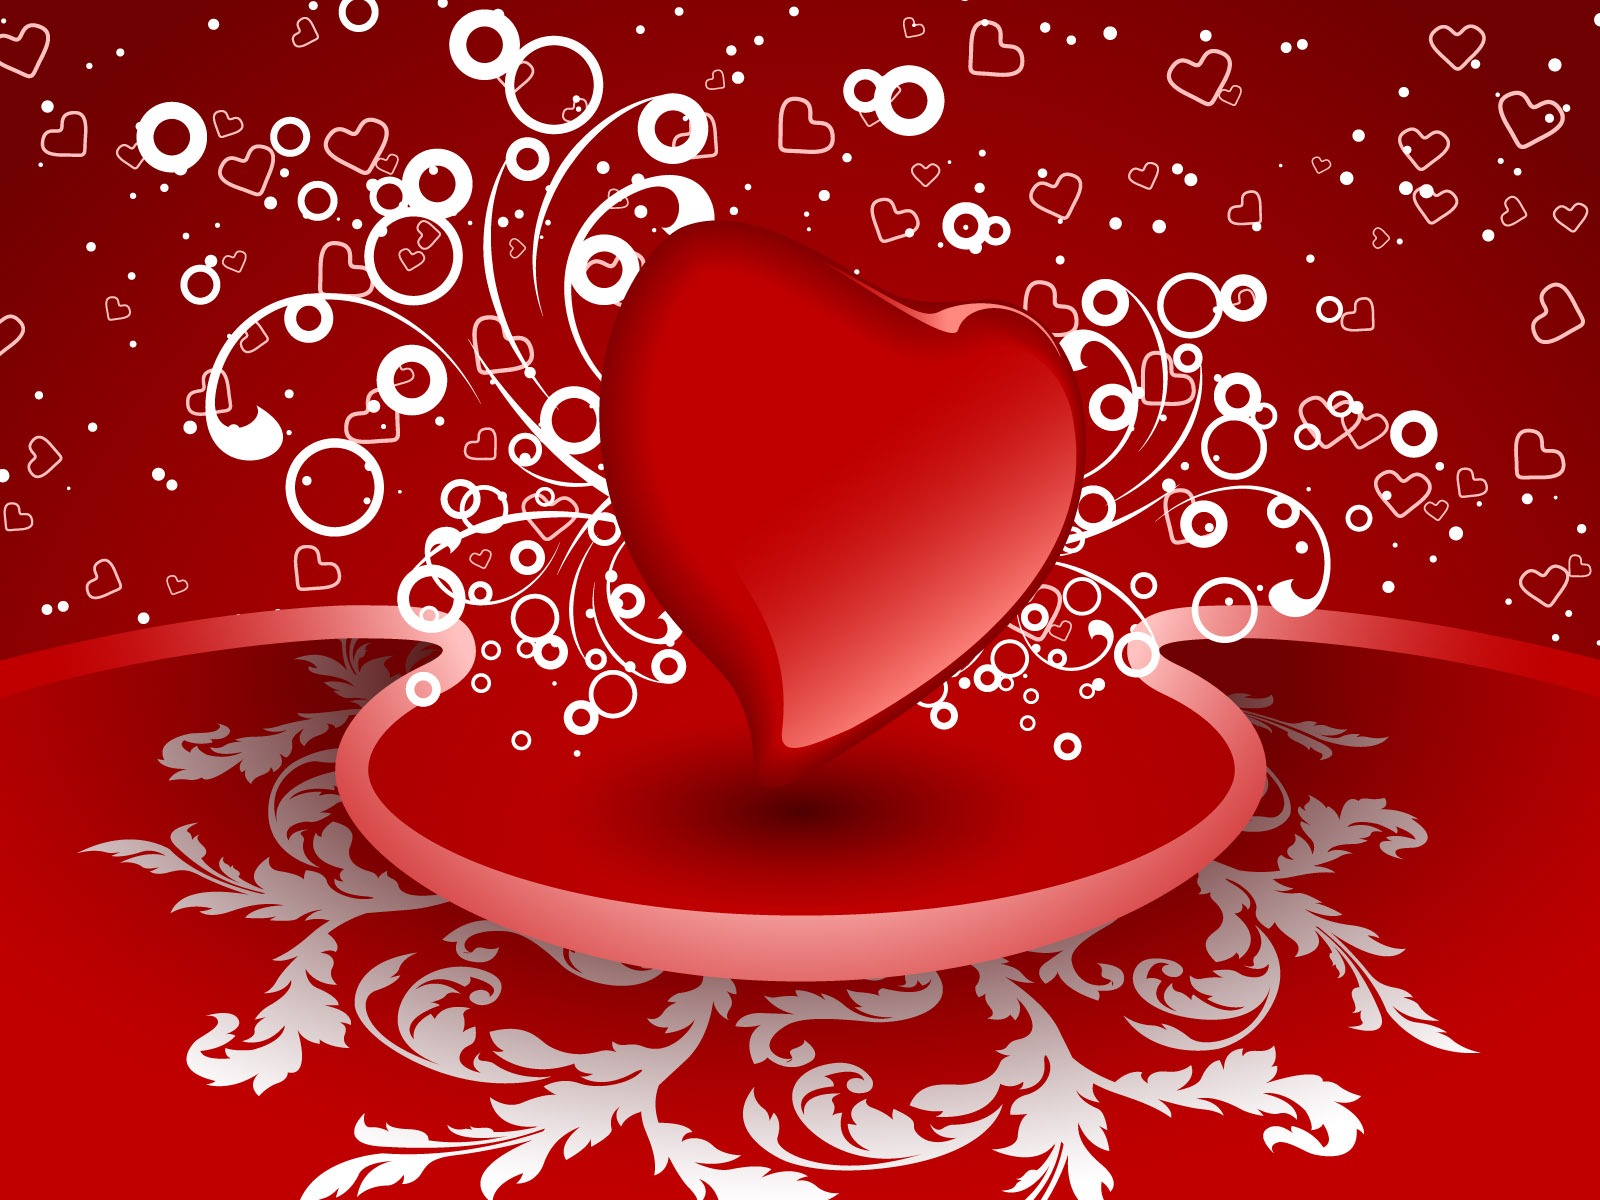 Valentine's Day Love Theme Wallpapers (2) #8 - 1600x1200